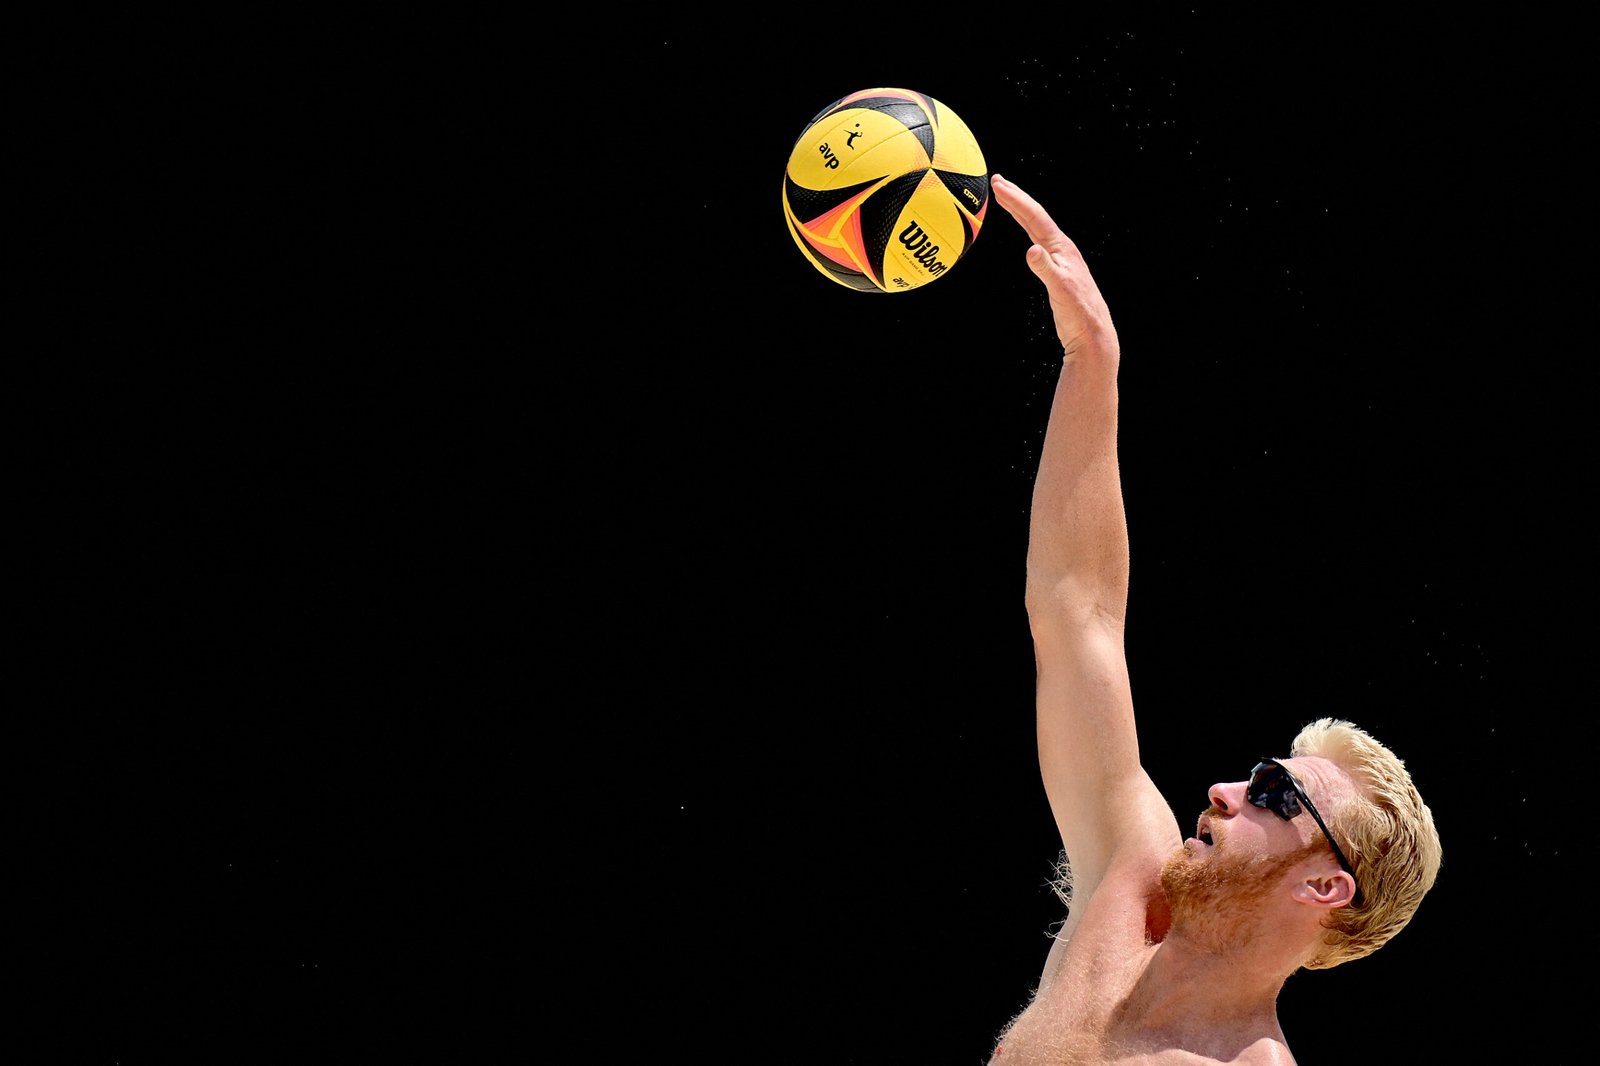 Ex-NBA player Chase Budinger makes Olympics in beach volleyball